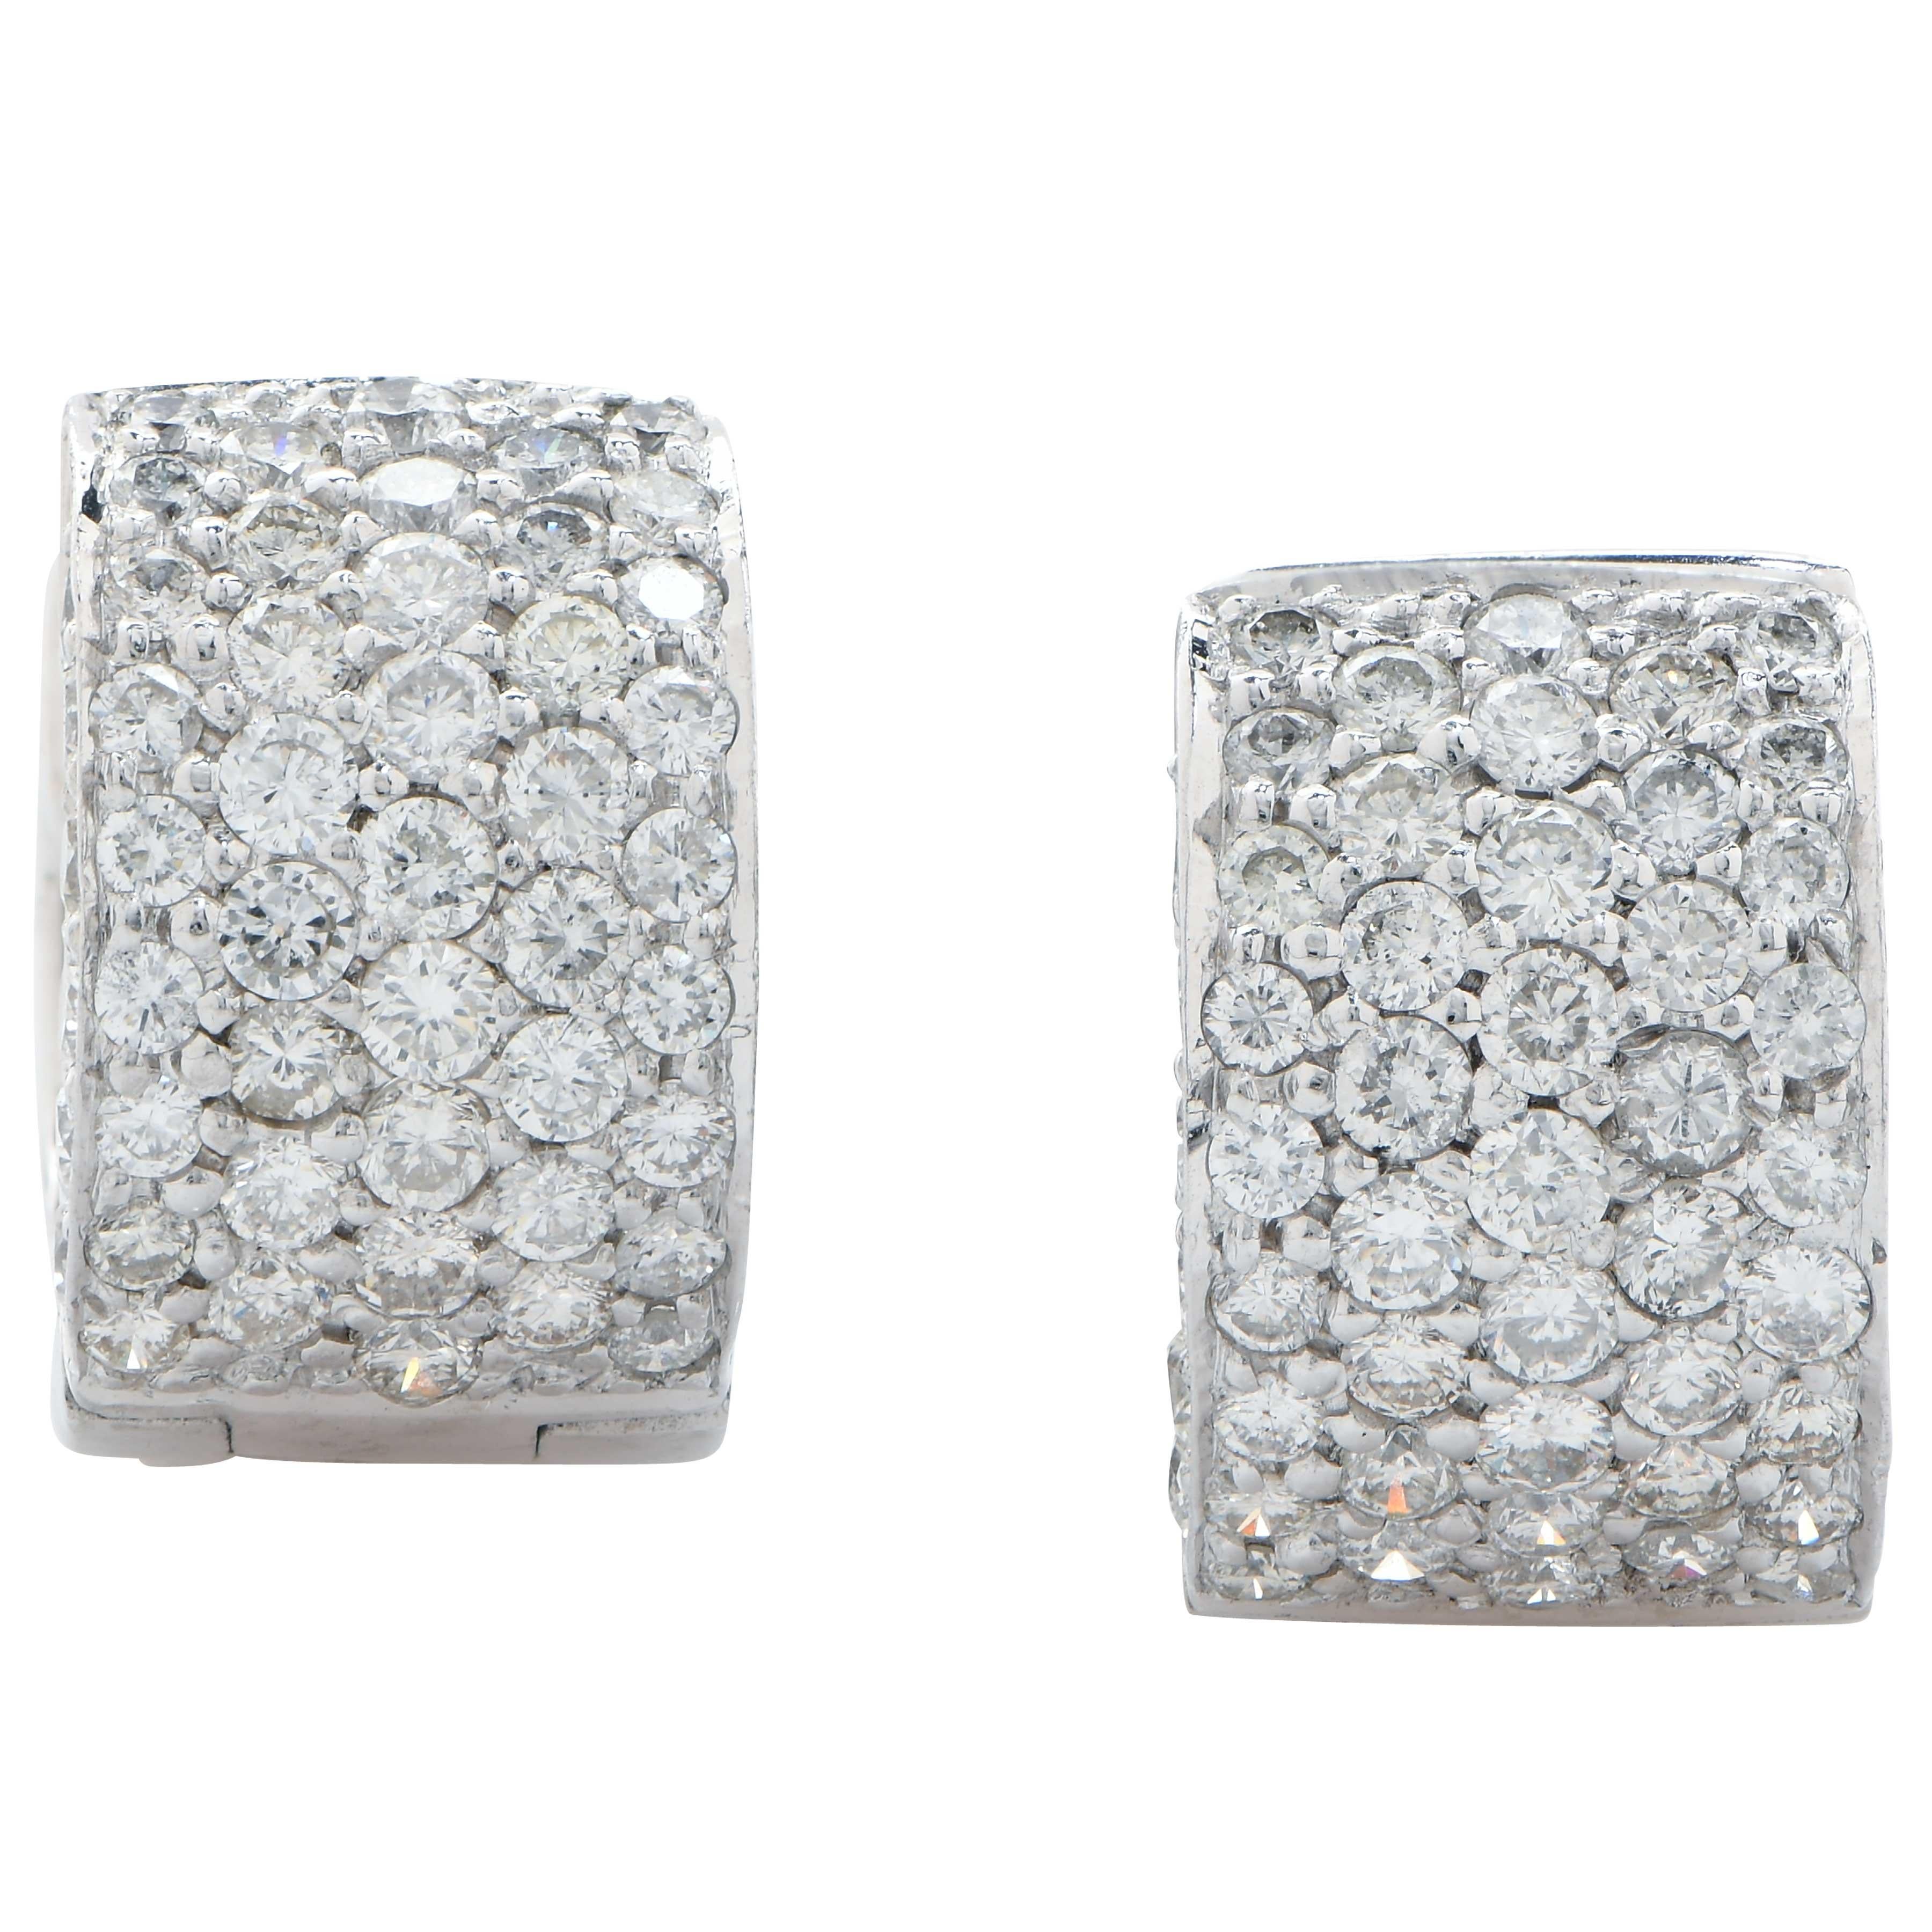 Designed in 18 karat white gold, ensuring durability and a timeless appeal, these lovely diamond earrings are quite beautiful.

The centerpiece of these earrings is the dazzling display of diamonds. A total of 86 diamonds, collectively weighing